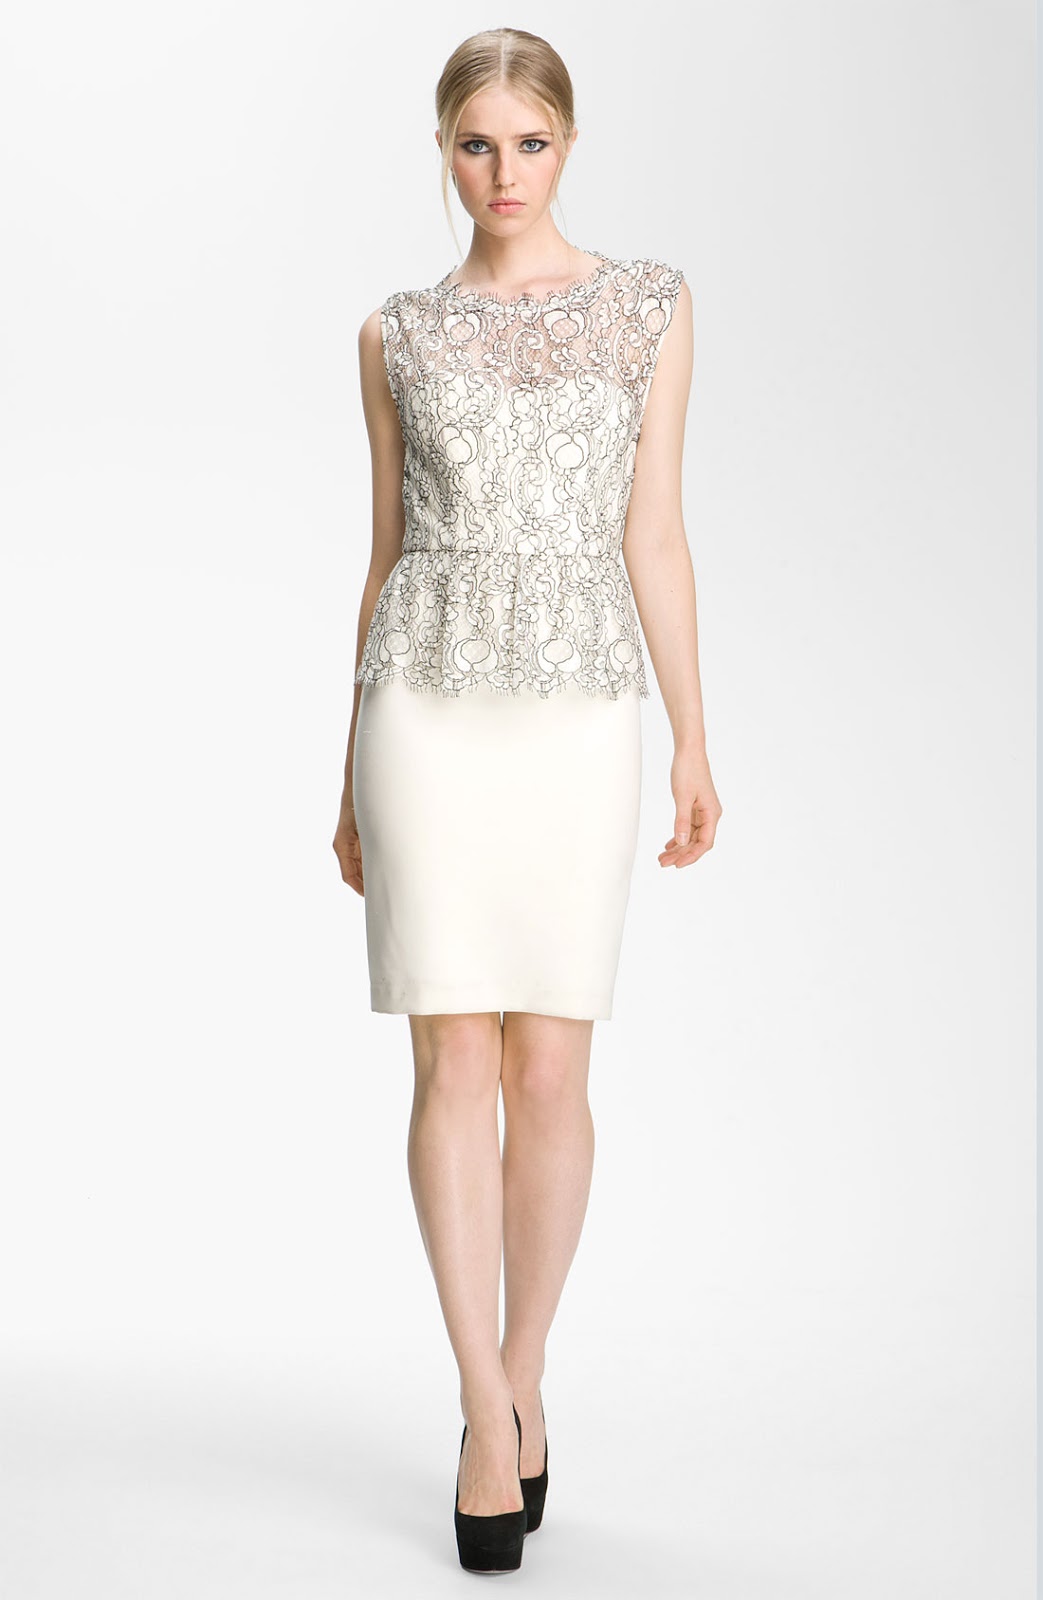 Lace Top White Dress & Be Beautiful And Chic